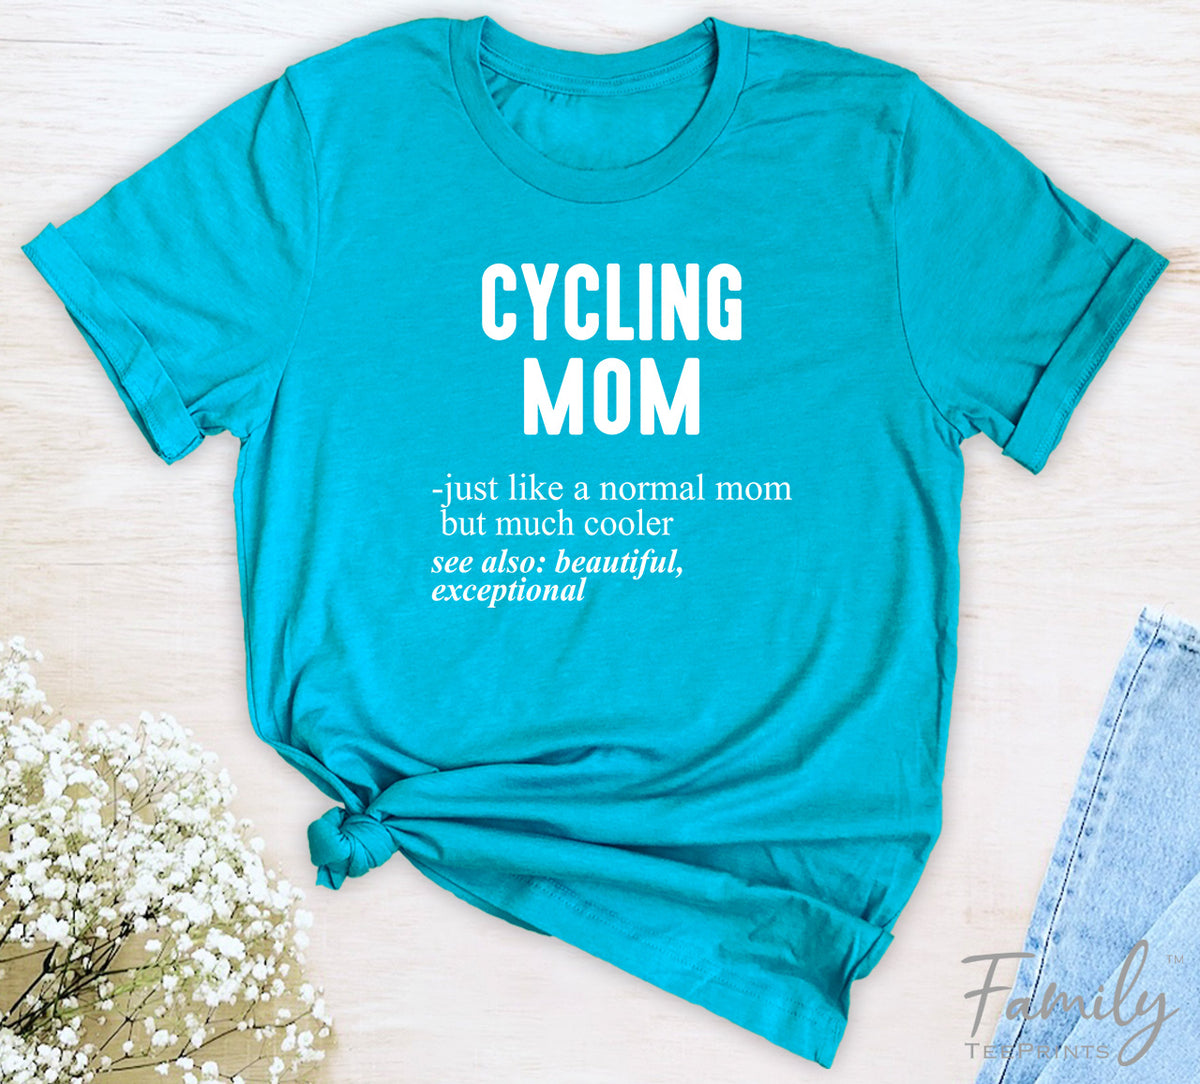 Cycling Mom Just Like A Normal Mom - Unisex T-shirt - Cycling Mom Shirt - Gift For Cycling Mom - familyteeprints